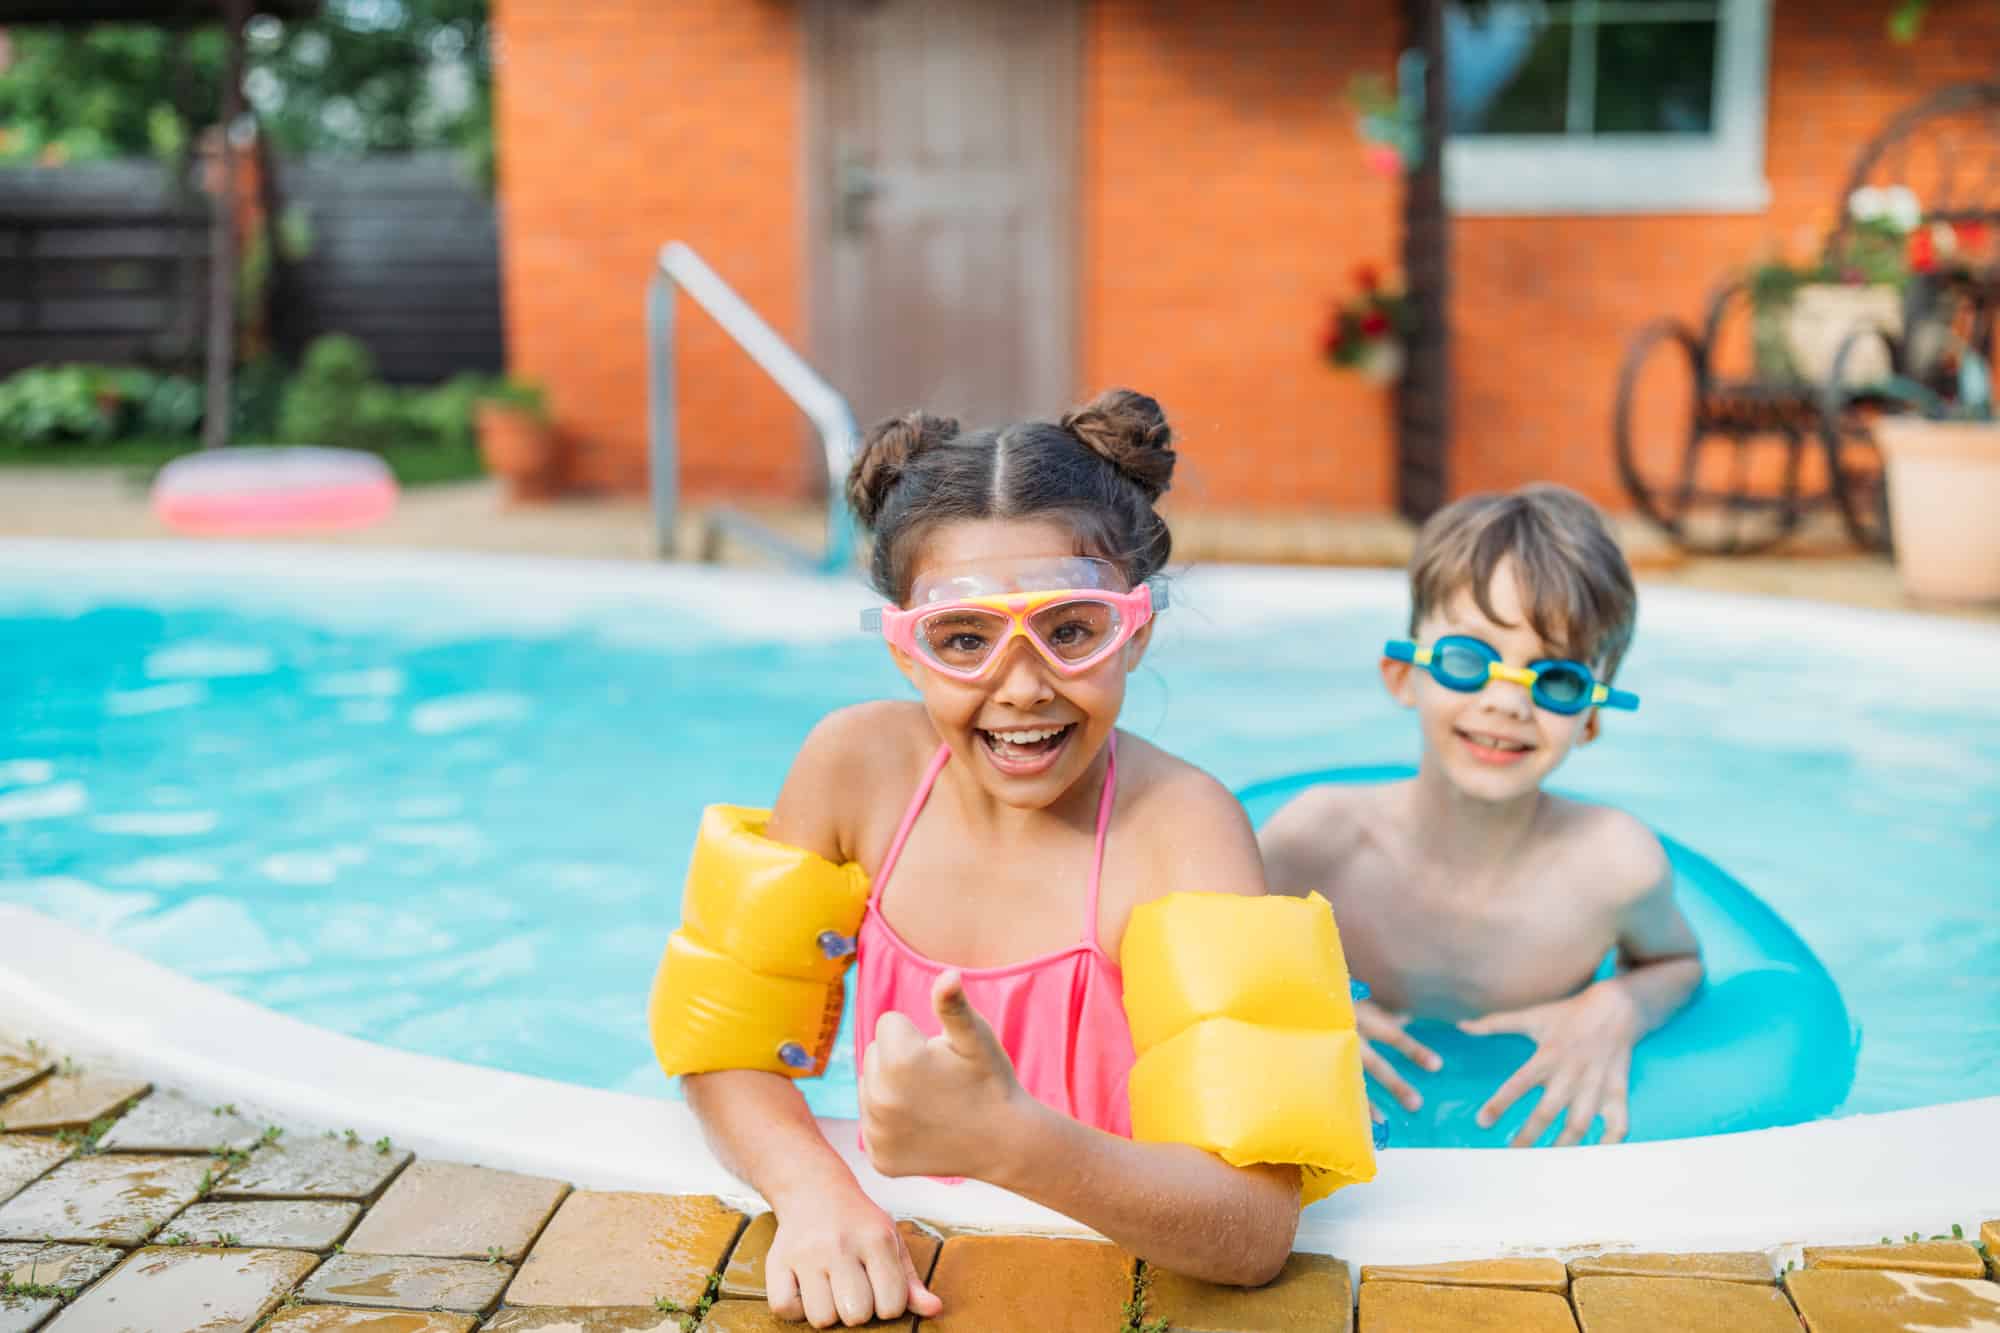 What To Do When Your Pool Breaker Trips